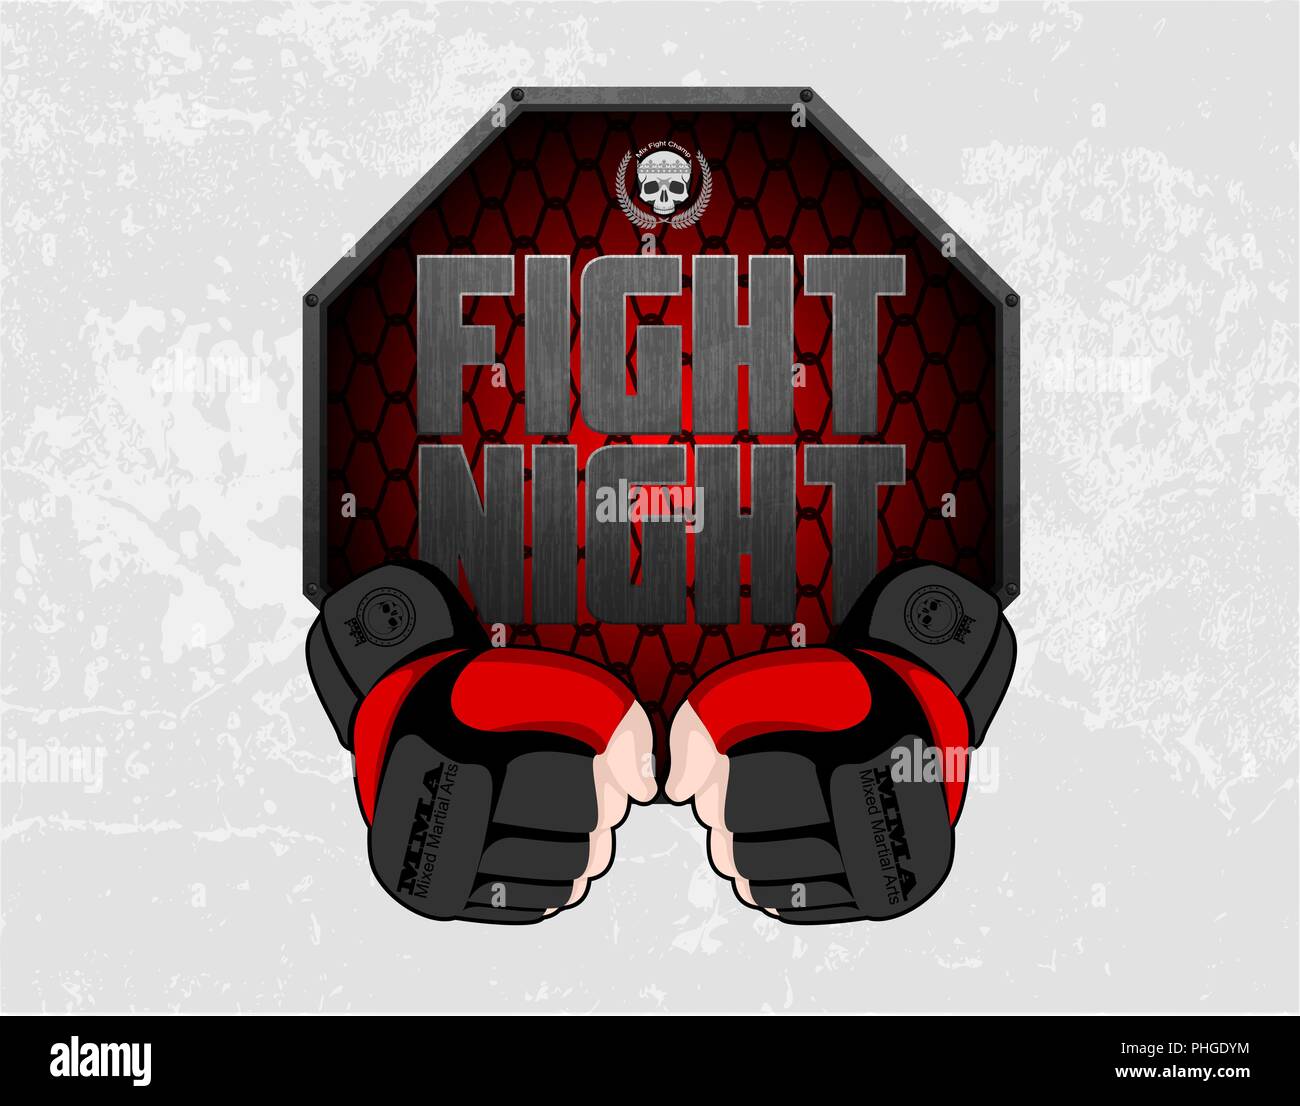 MMA gloves hands octagon stage cage poster. Mixed martial arts fight night banner. Fighting emblem logo element. Boxing decoration illustration Stock Vector